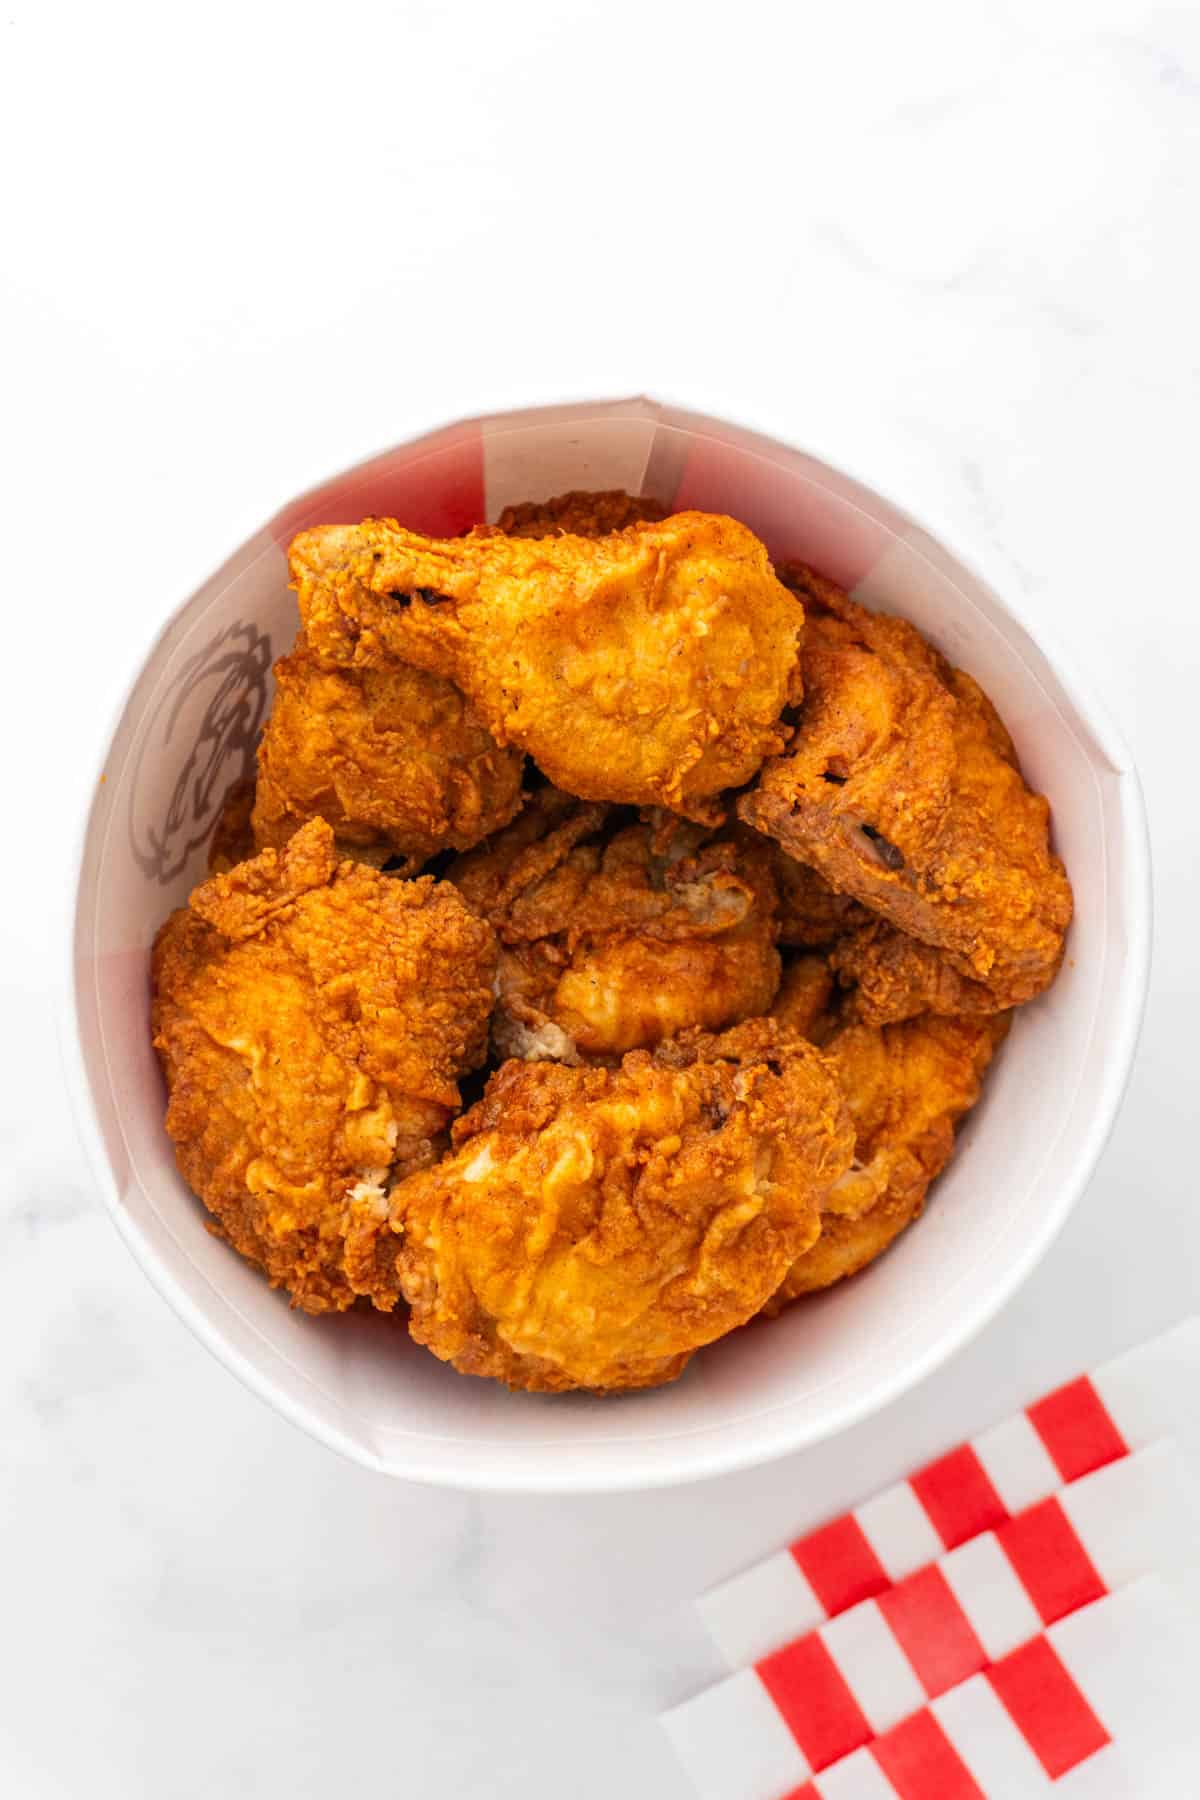 A bucket of Kentucky fried chicken on a white background. 